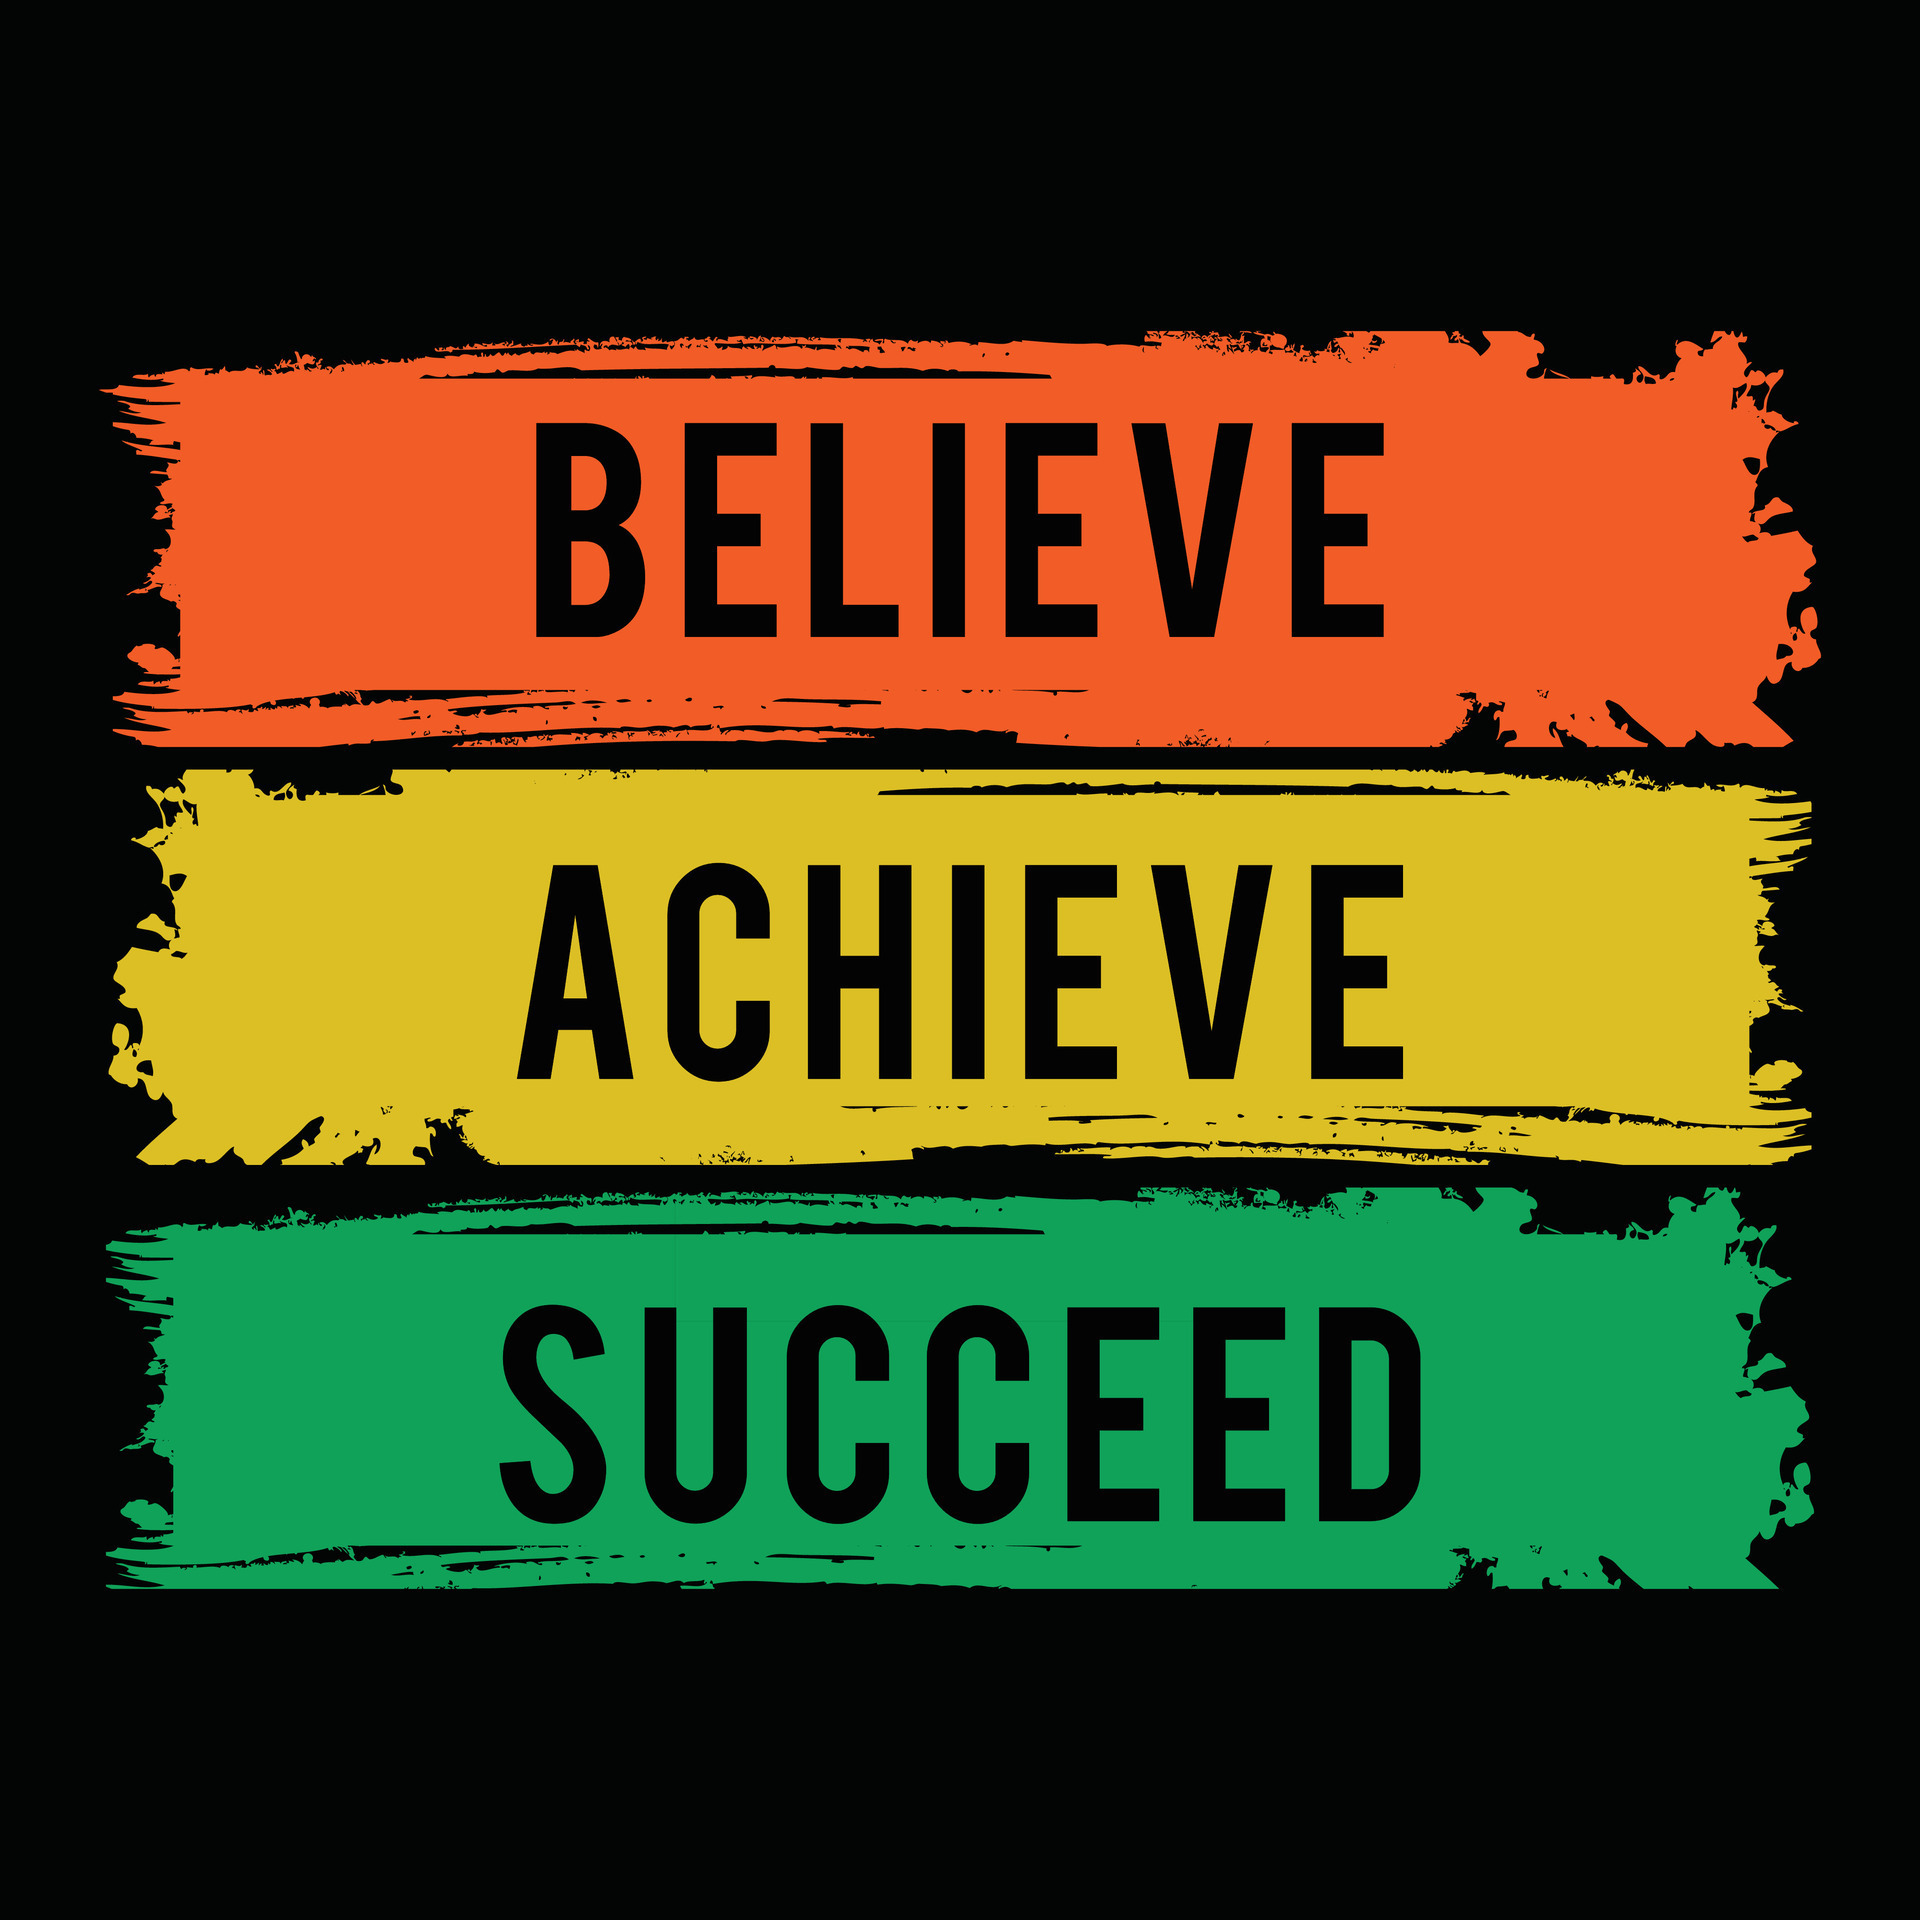 https://static.vecteezy.com/system/resources/previews/027/190/096/original/believe-achieve-succeed-motivational-quotes-typography-t-shirt-design-art-inspirational-for-life-and-happiness-free-vector.jpg